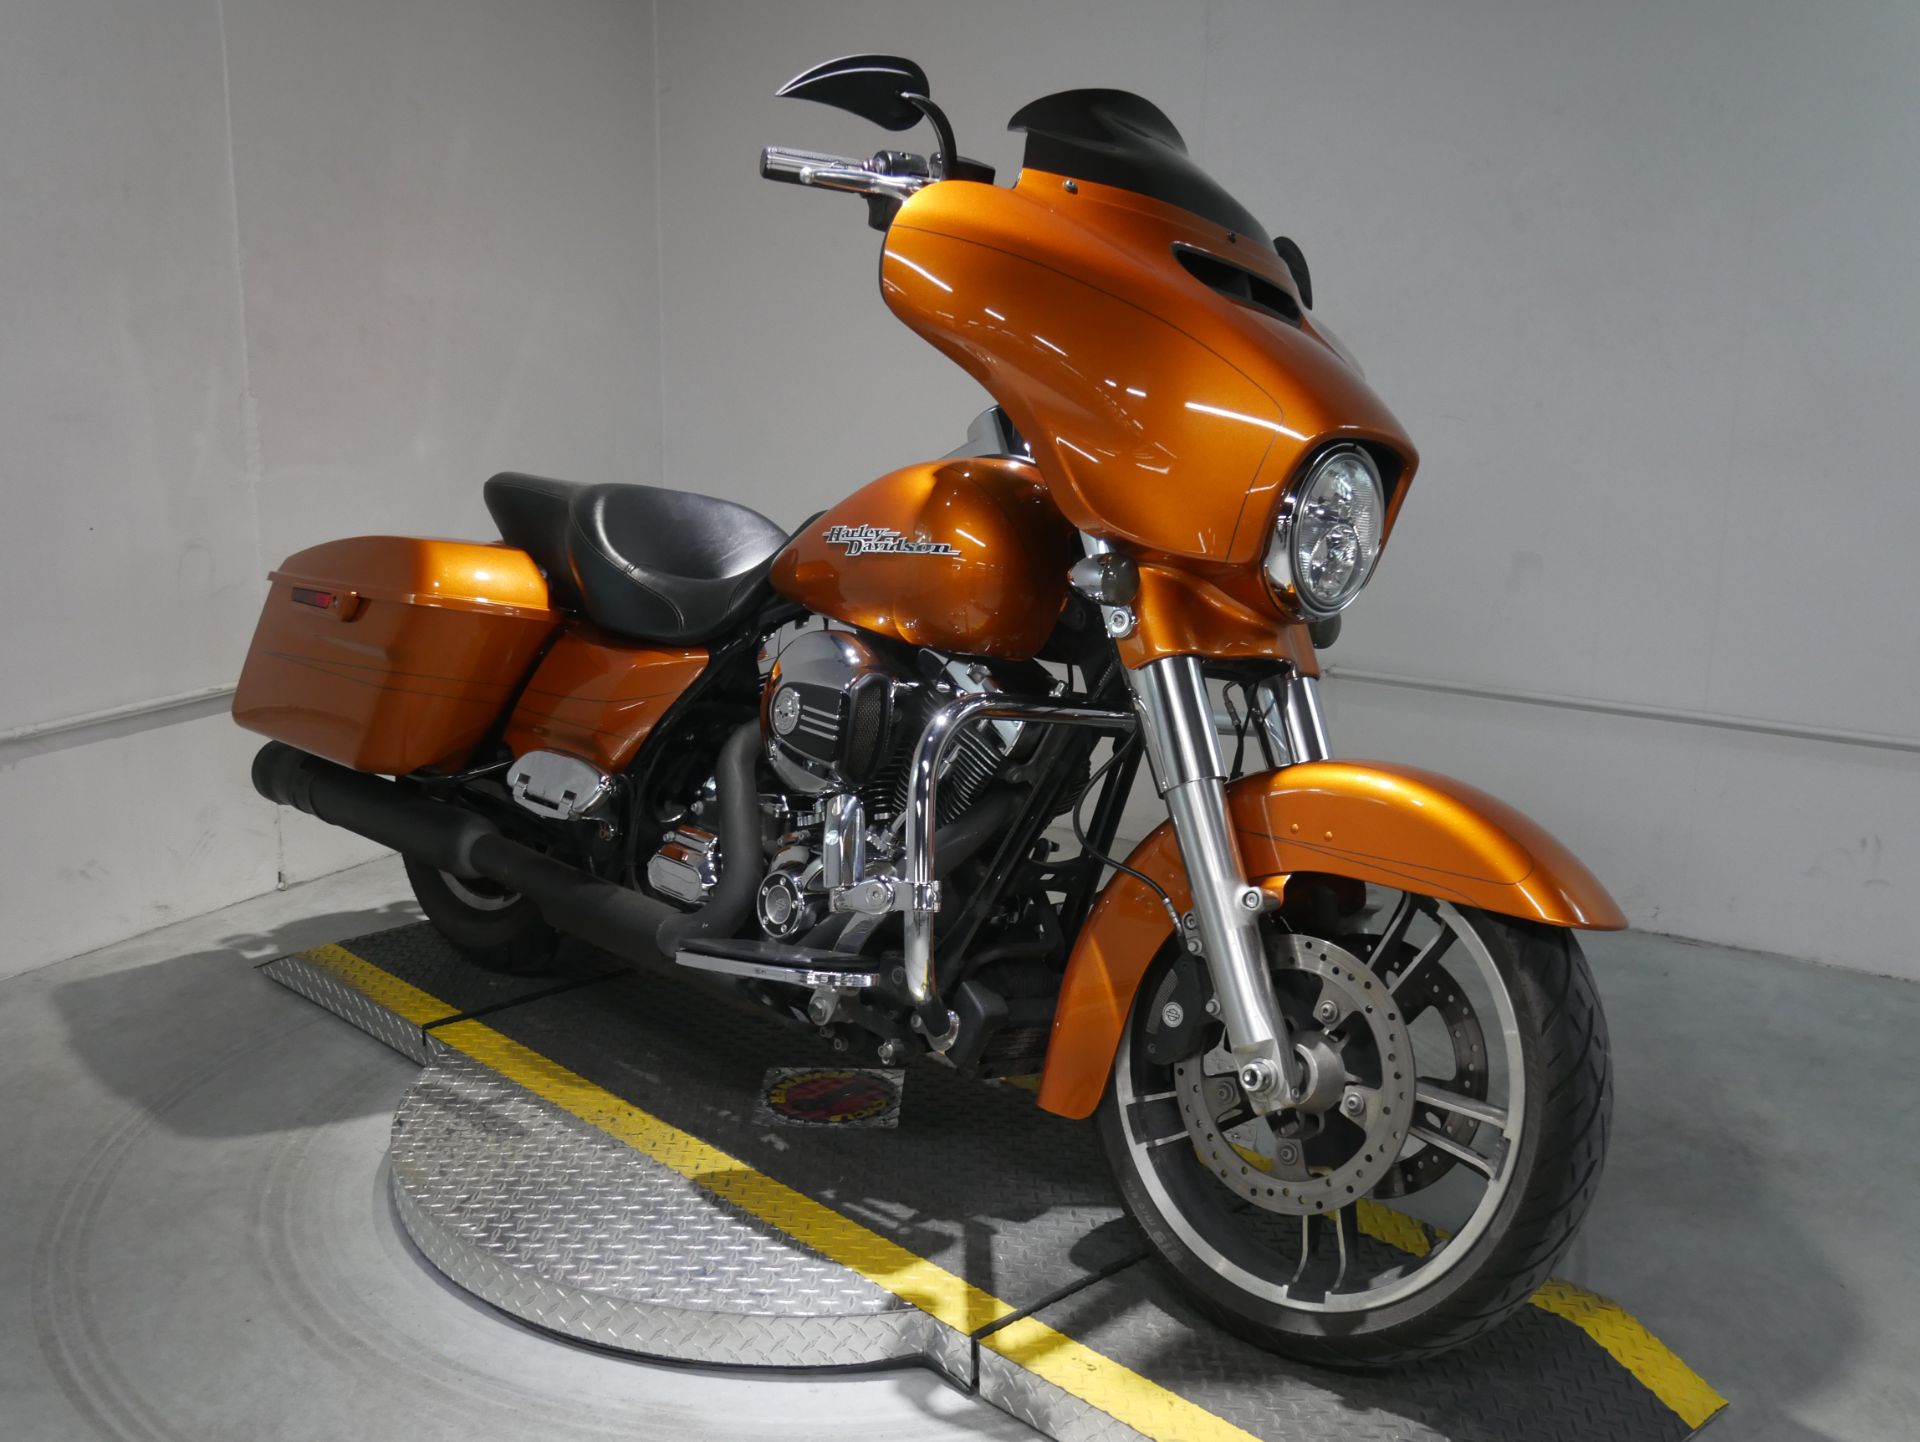 Used 2015 Harley Davidson Street Glide Special Amber Whiskey Motorcycles In Dubuque Ia 676092